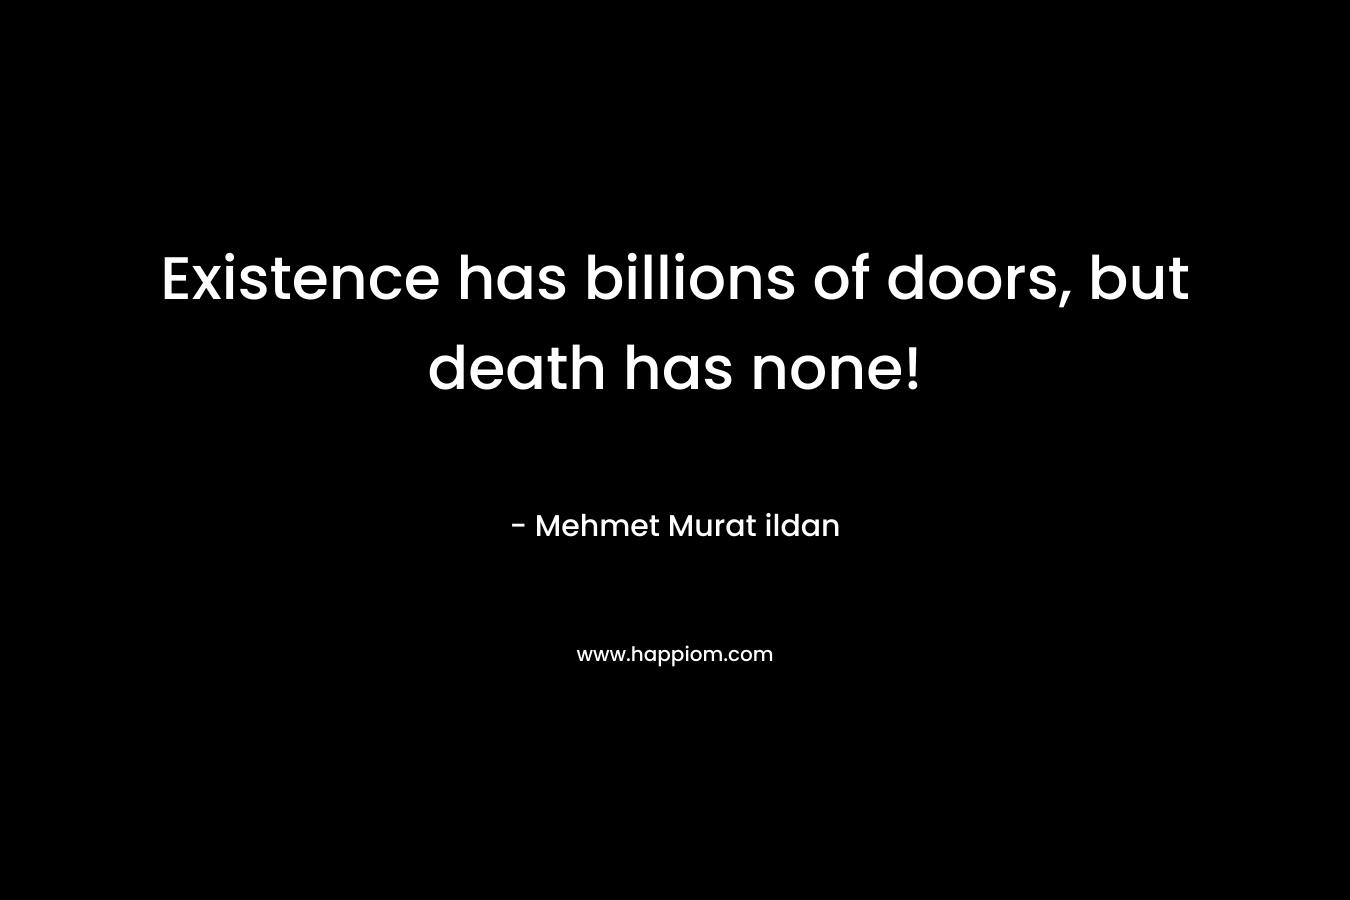 Existence has billions of doors, but death has none!